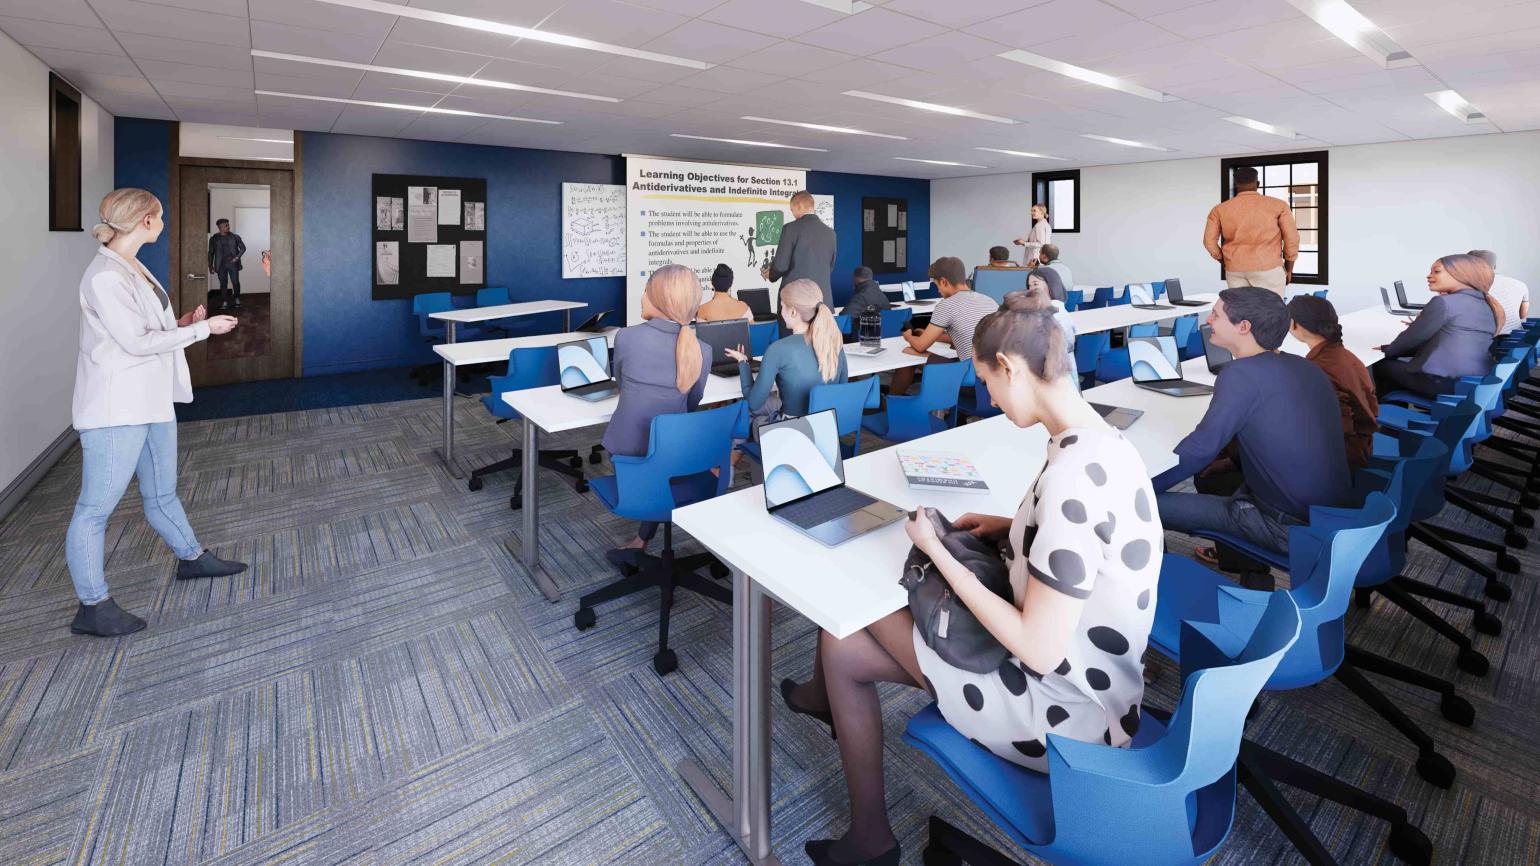 Rendering of a classroom with grey carpet, white walls with one blue accent wall, and tiled ceilings with fluorescent lighting. Students are seated in blue, plastic spinning chairs at long, skinny, white tables, facing the instructor. The instructor points to a large, digital screen behind him.